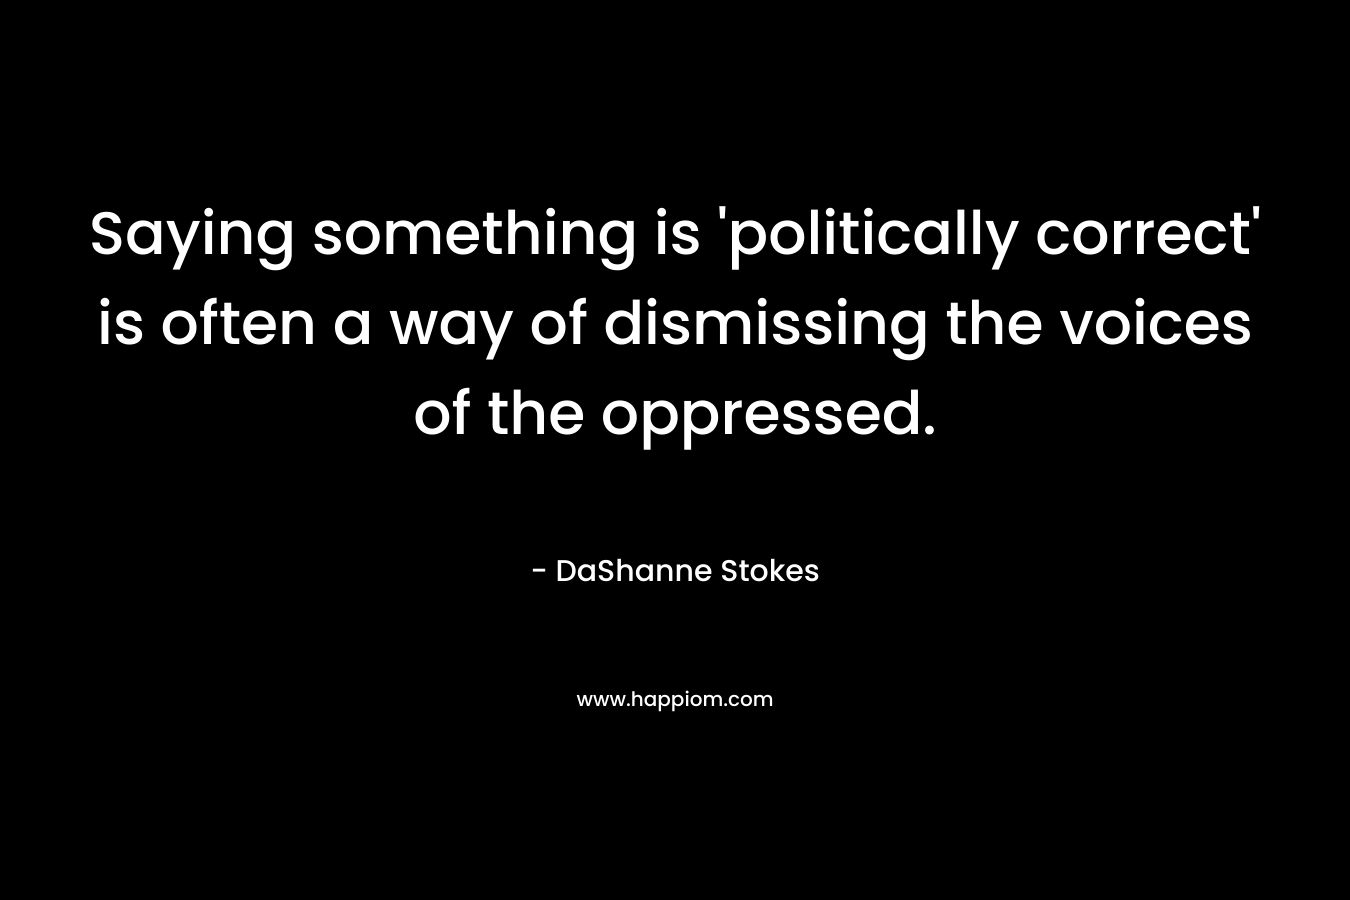 Saying something is 'politically correct' is often a way of dismissing the voices of the oppressed.